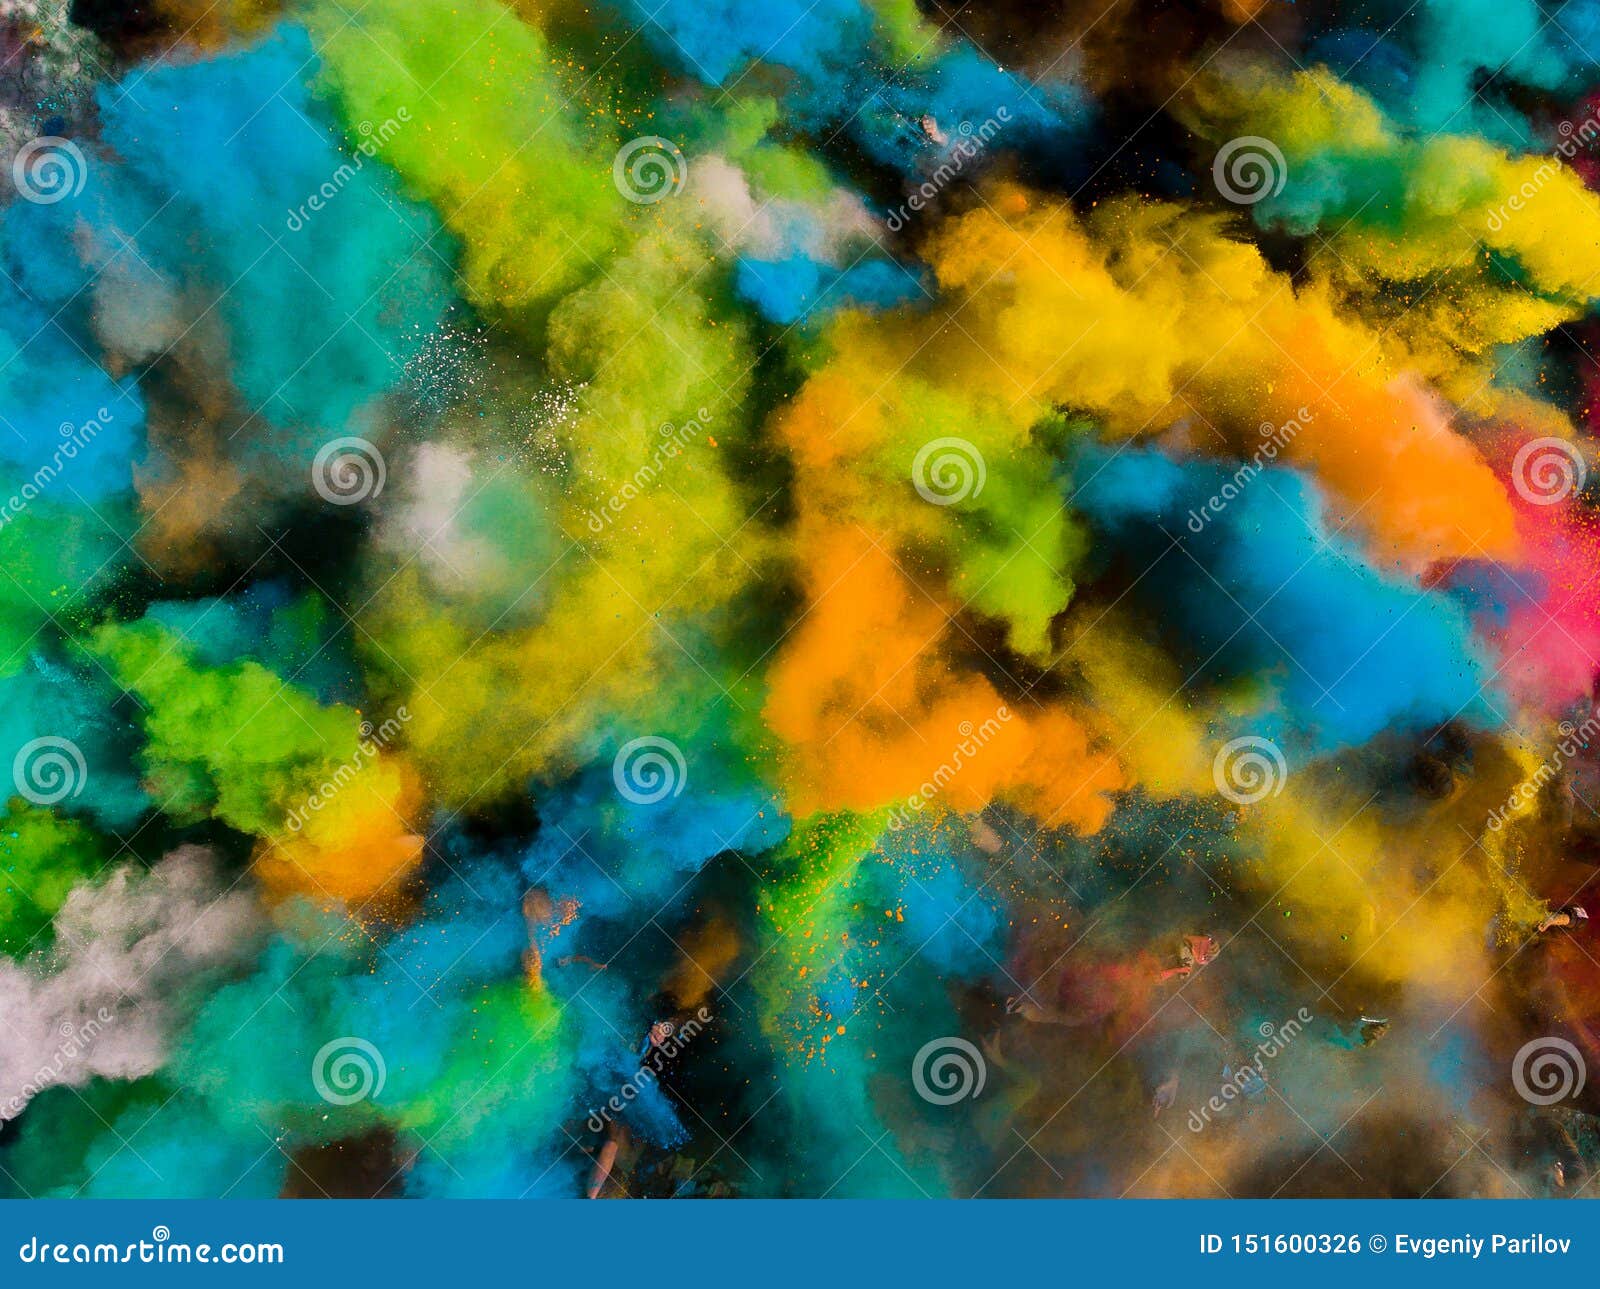 Paint Holi Festival, a Crowd of People Involved. Top View, Aerial Drone  Photo Stock Photo - Image of party, adult: 151600326